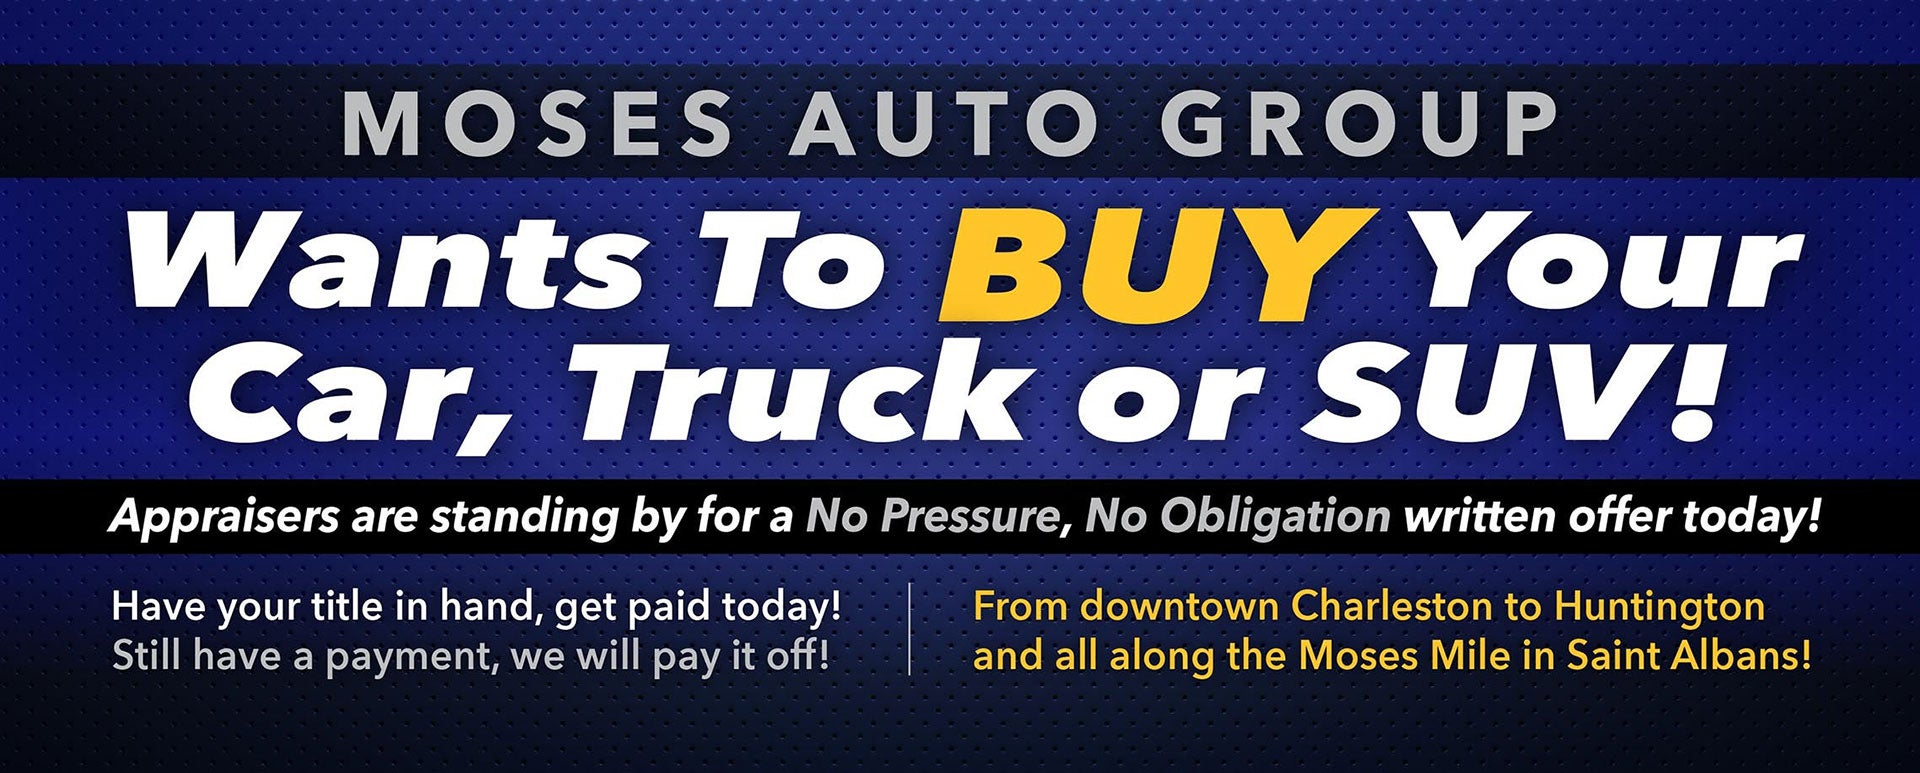 Moses Auto Group wants to buy your car, truck, or suv!